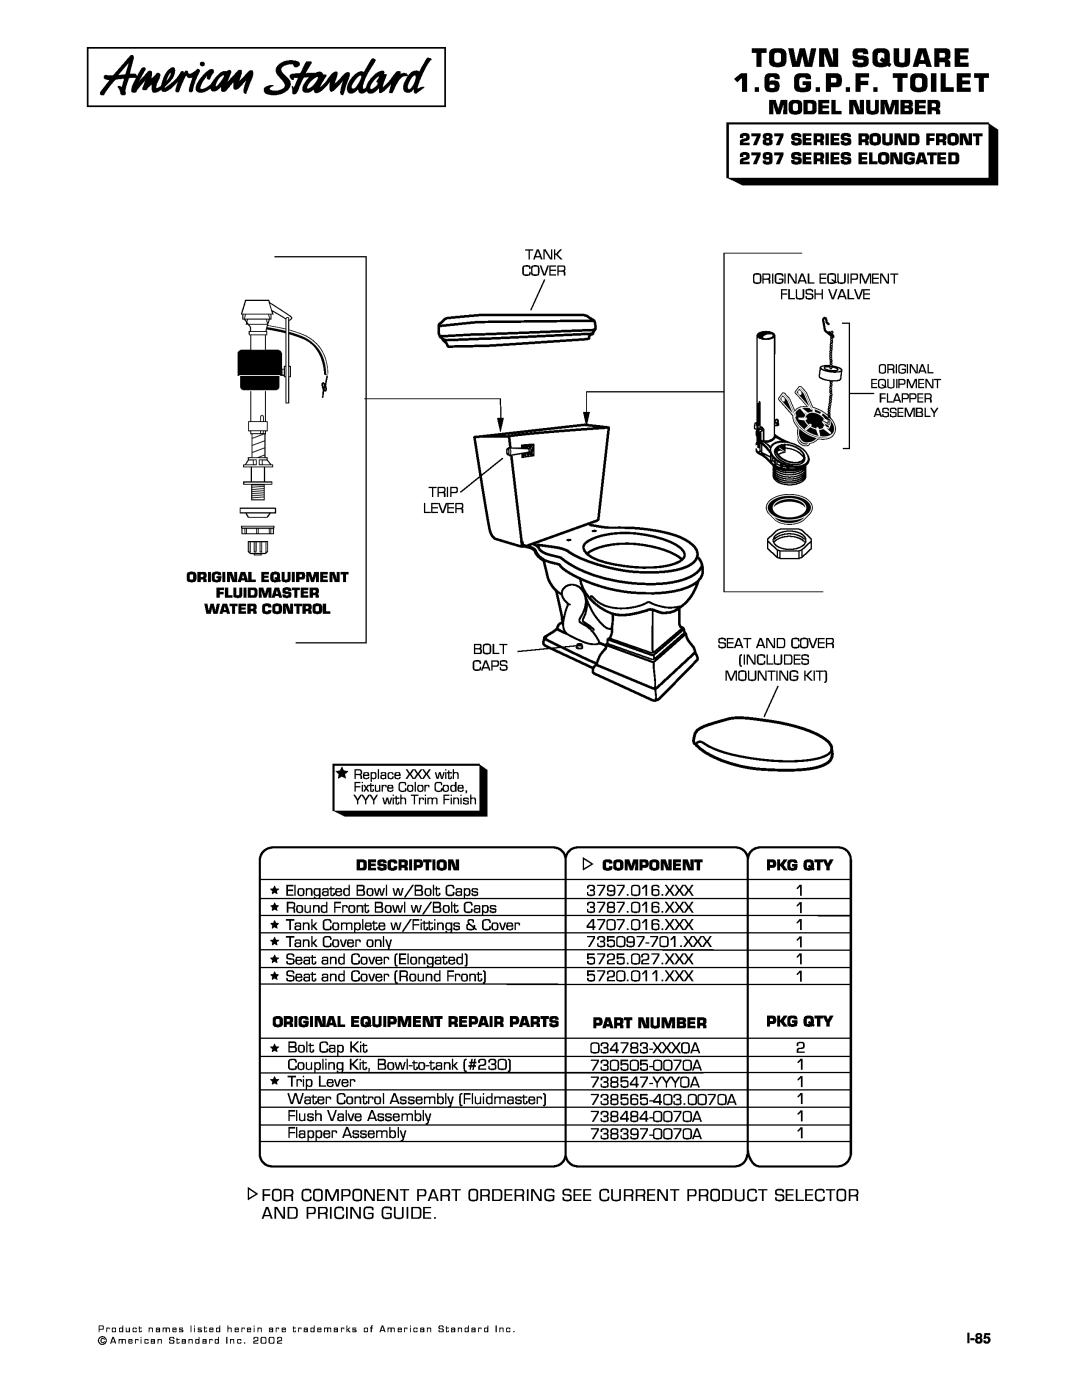 American Standard 2797 Series manual TOWN SQUARE 1.6 G.P.F. TOILET, Model Number, SERIES ROUND FRONT 2797 SERIES ELONGATED 